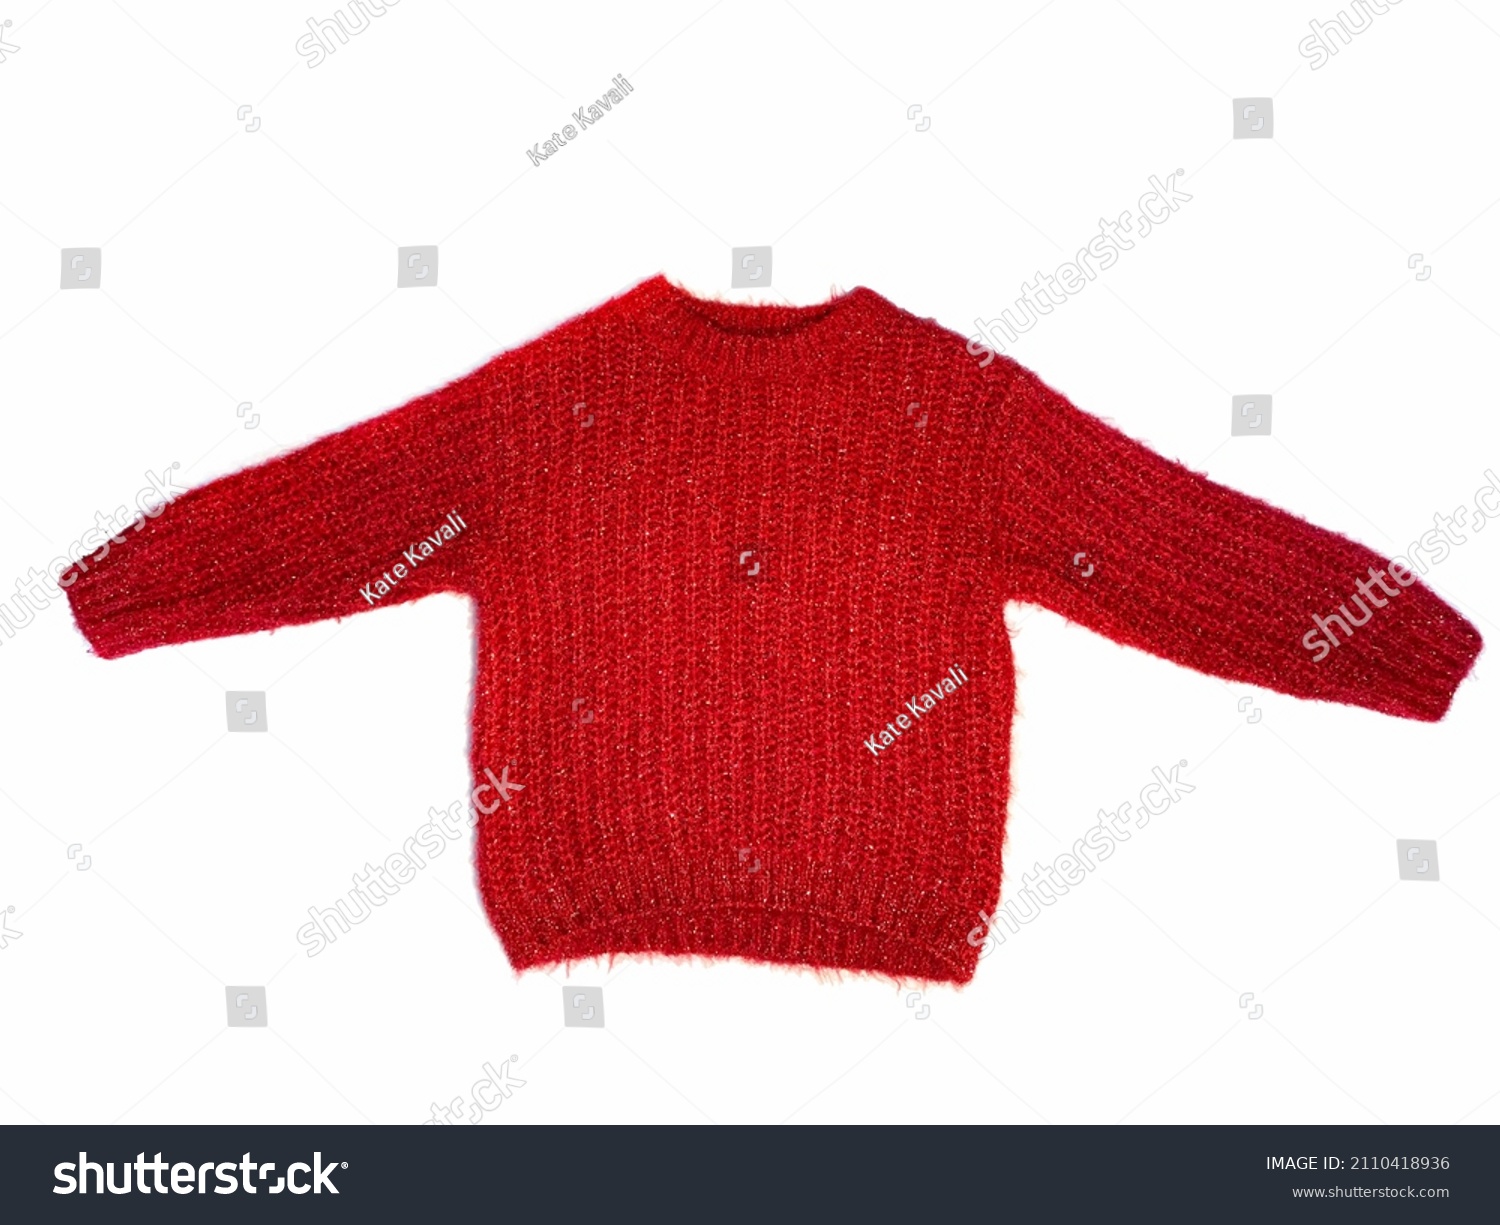 30,675 Knitted jumper Stock Photos, Images & Photography | Shutterstock